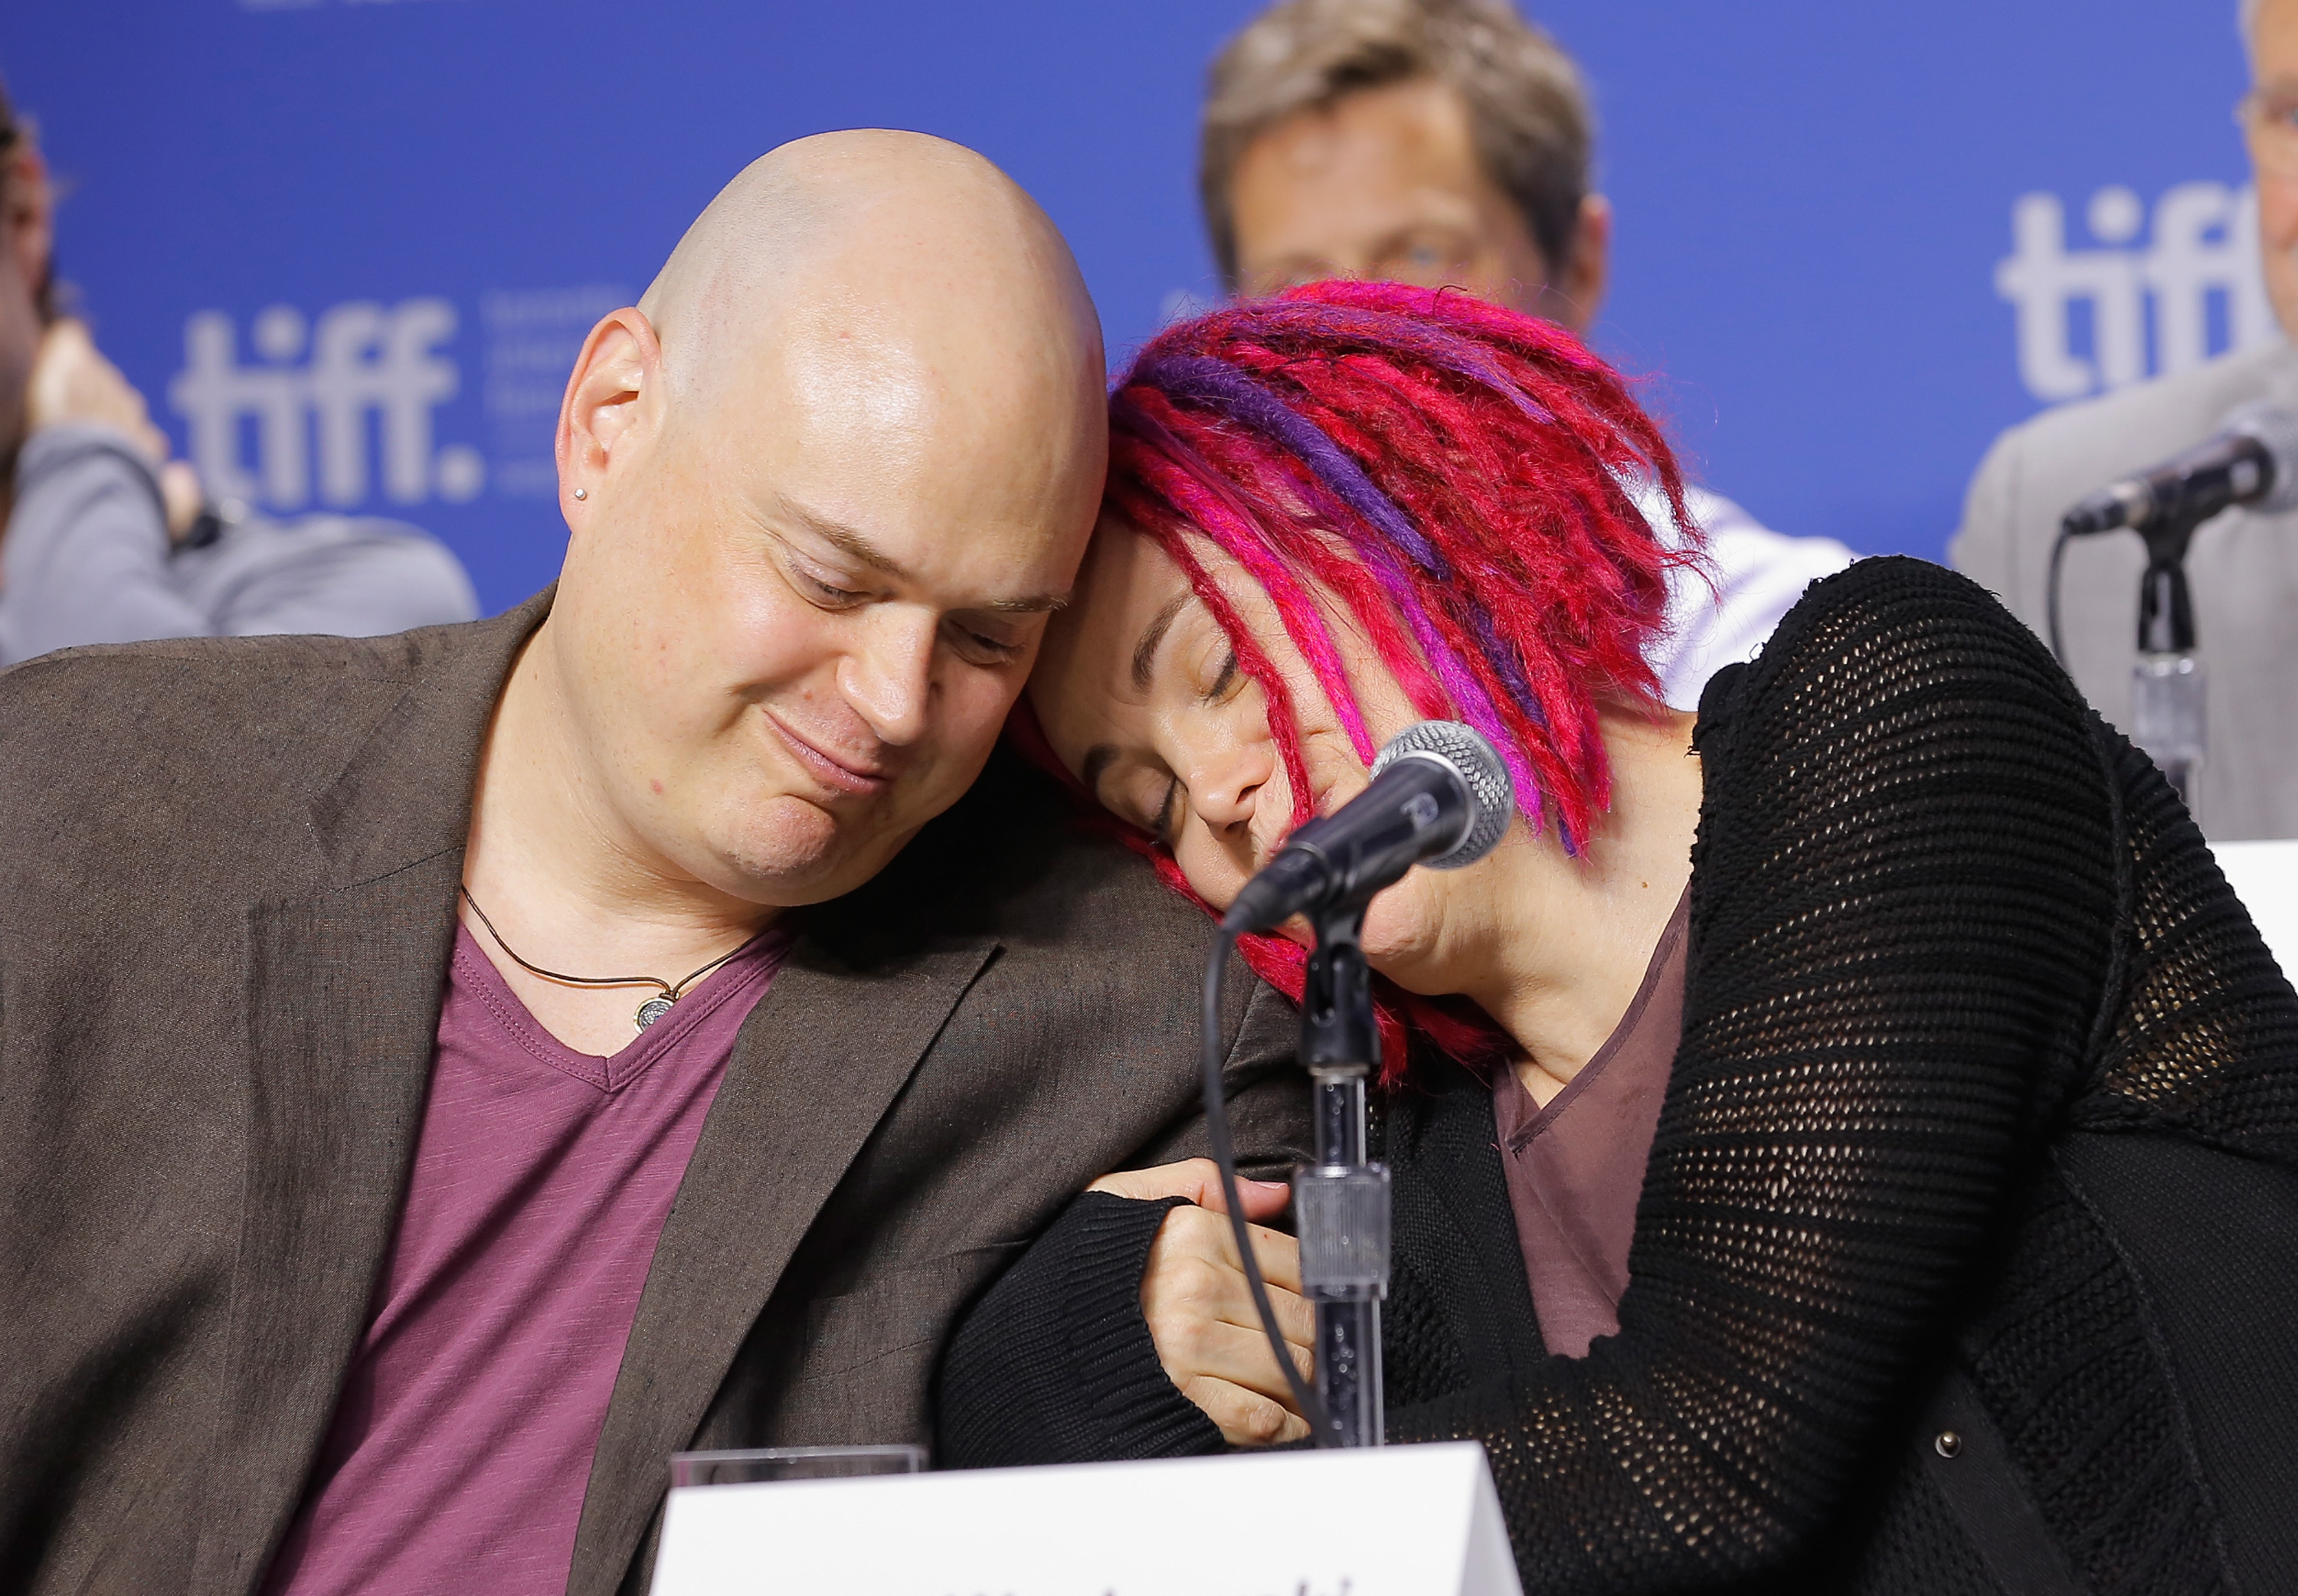 Andy Wachowski and Lana Wachowski speak onstage at the "Cloud Atlas" press conference at TIFF Bell Lightbox on September 9, 2012 in Toronto, Canada. | Source: Getty Images